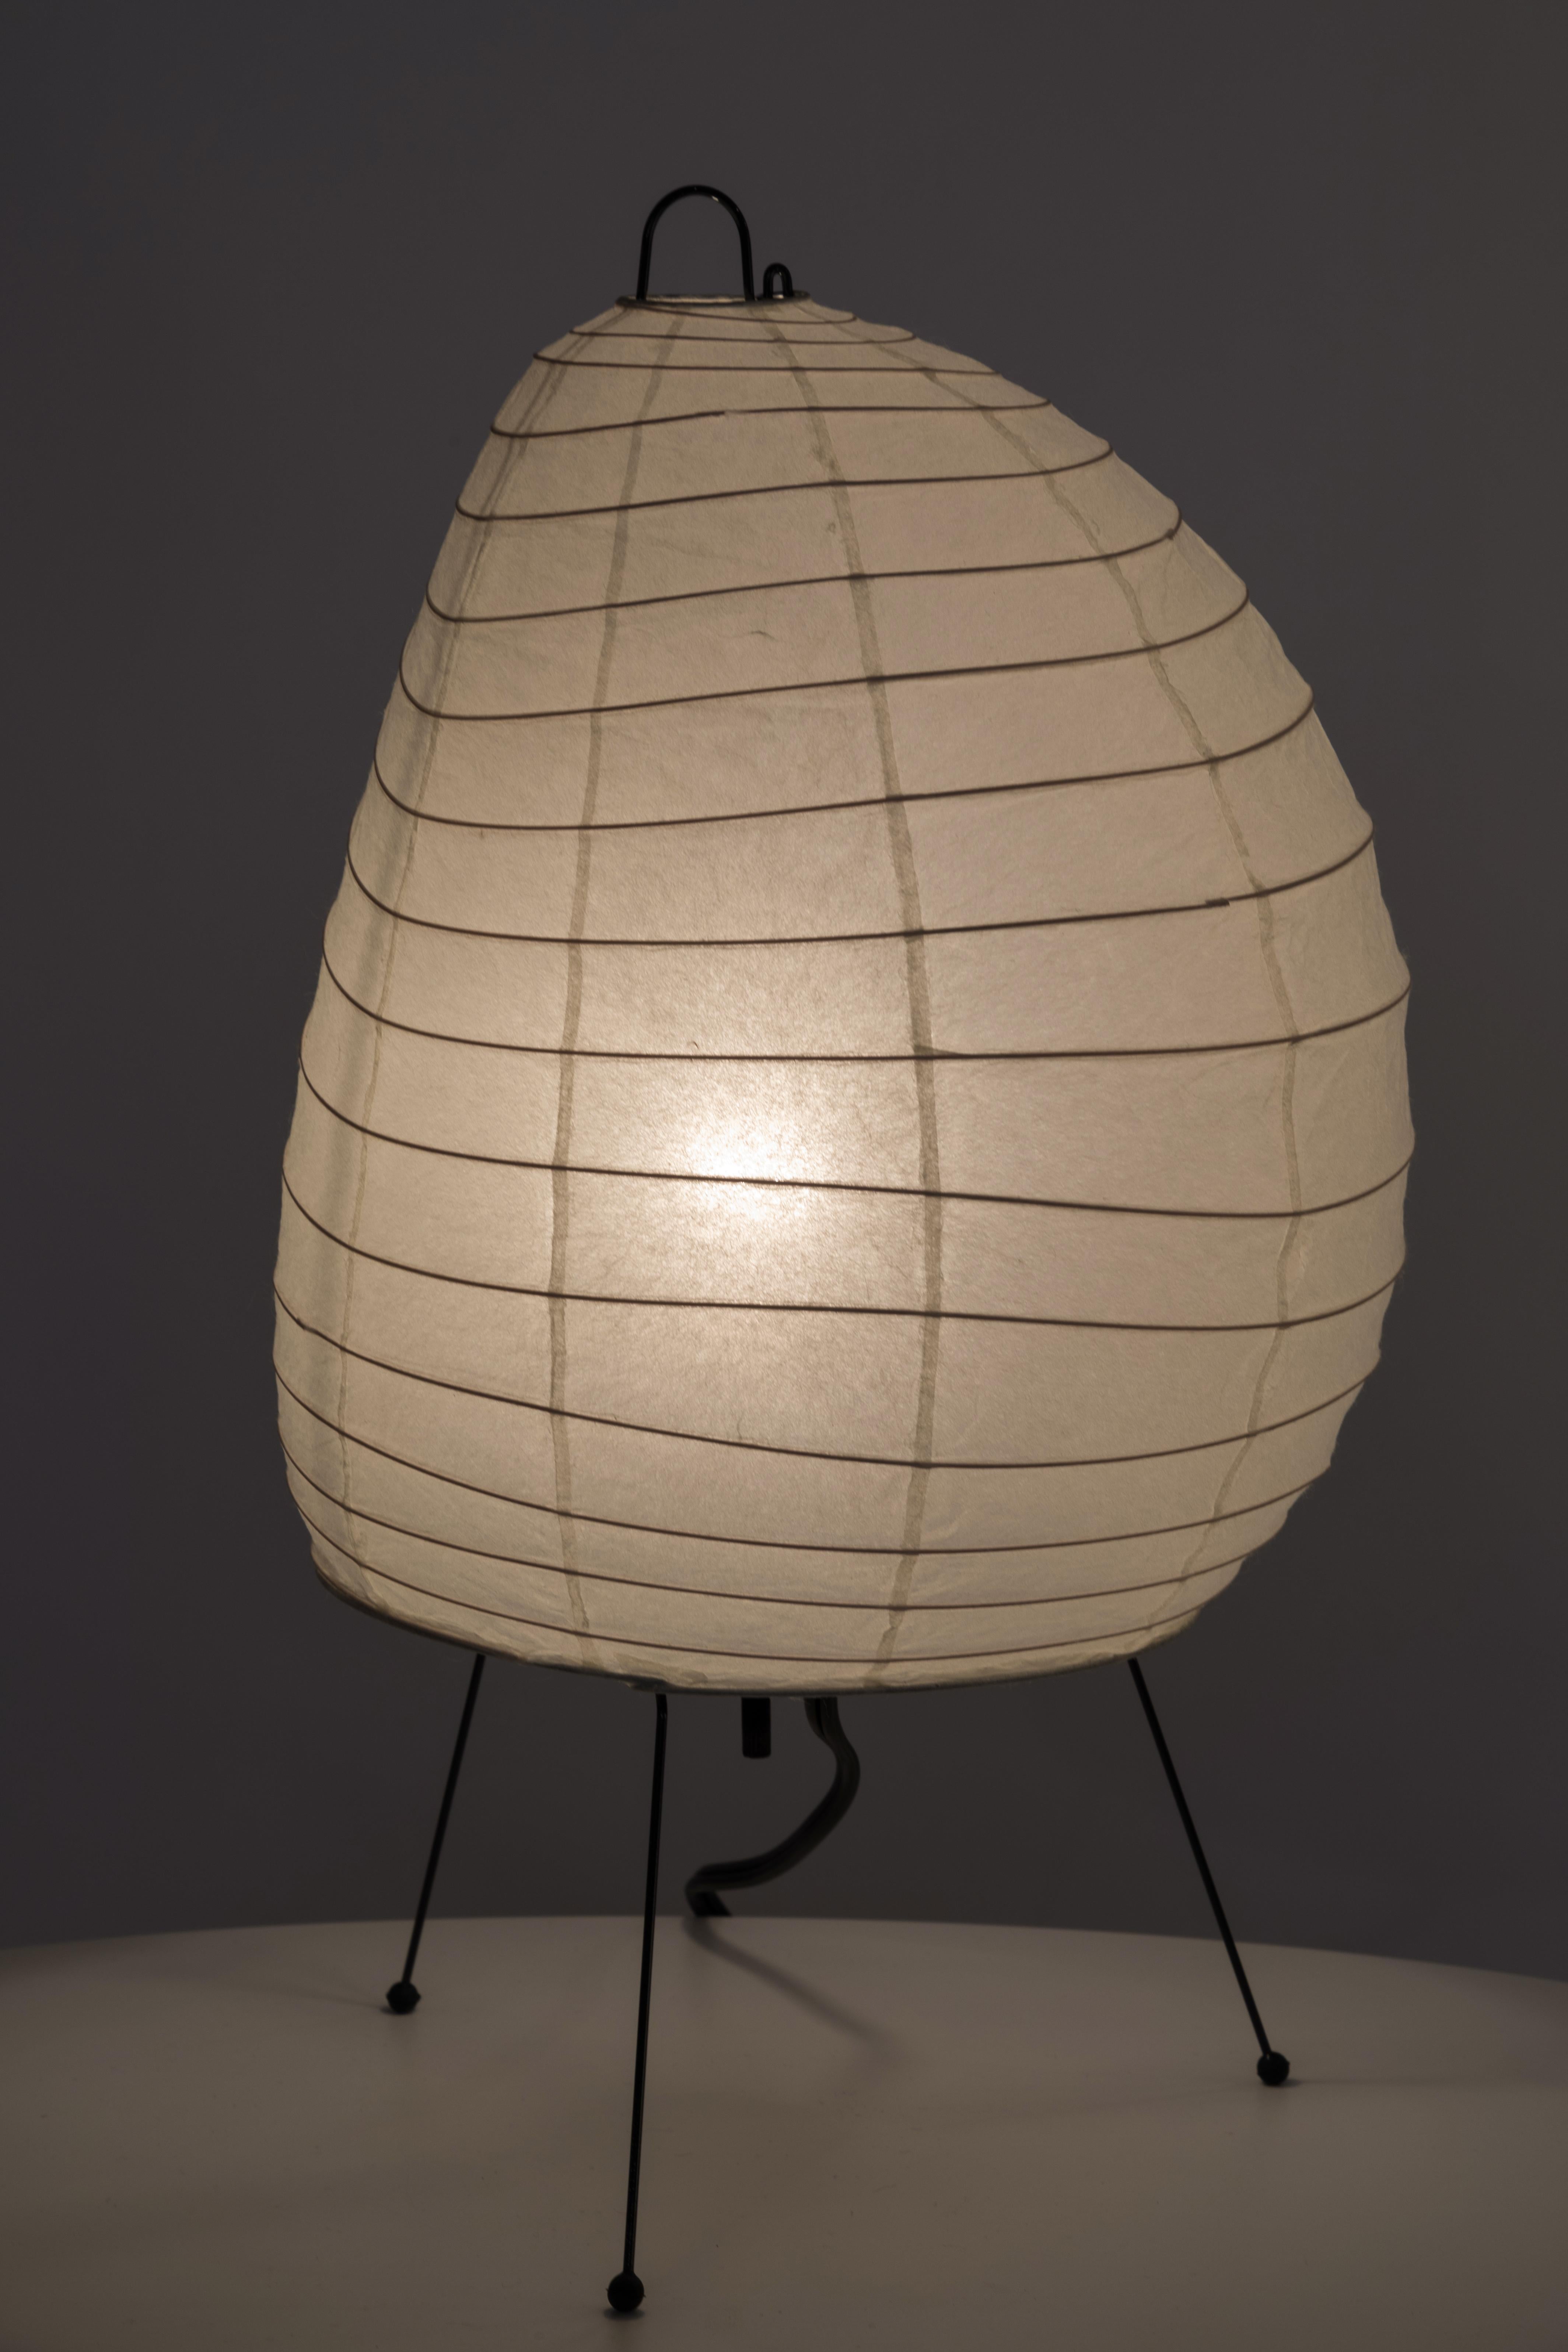 Akari Model 1N Light Sculpture by Isamu Noguchi In Good Condition For Sale In Glendale, CA